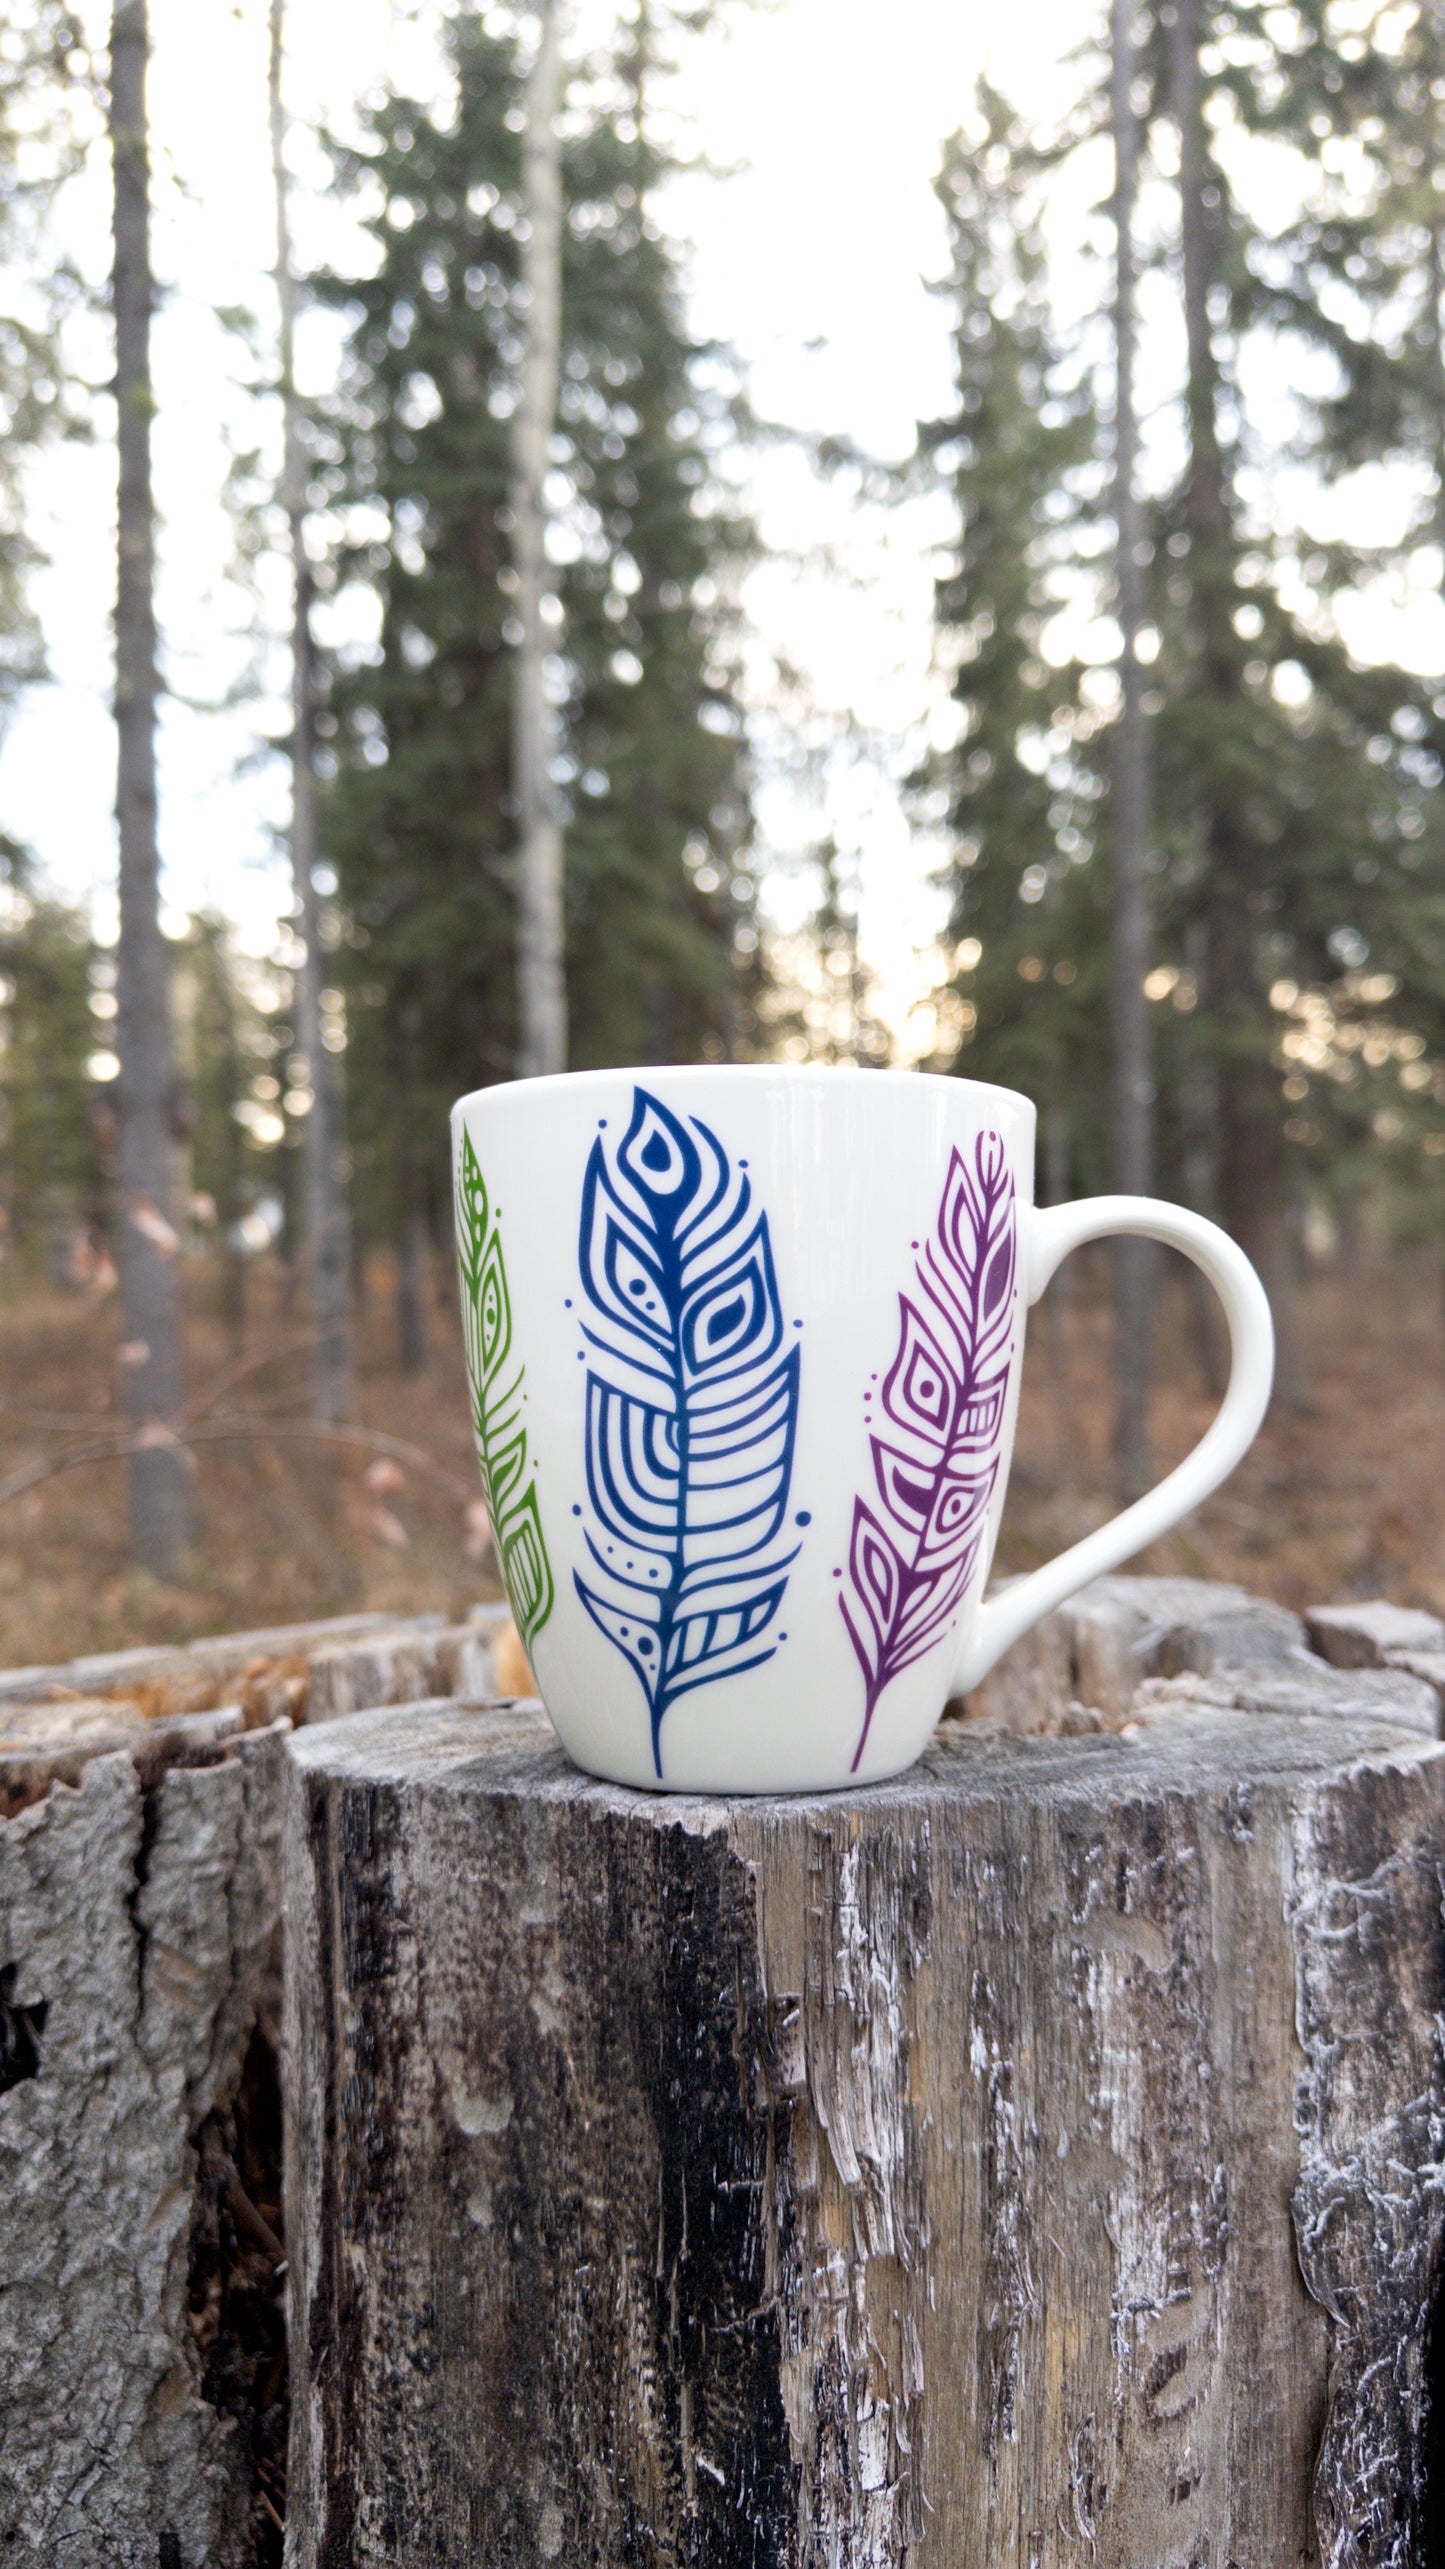 Patrick's Pride Feathers on a tall white mug, resting on a tree stump. The image shows the green, blue, and purple feathers of one side.